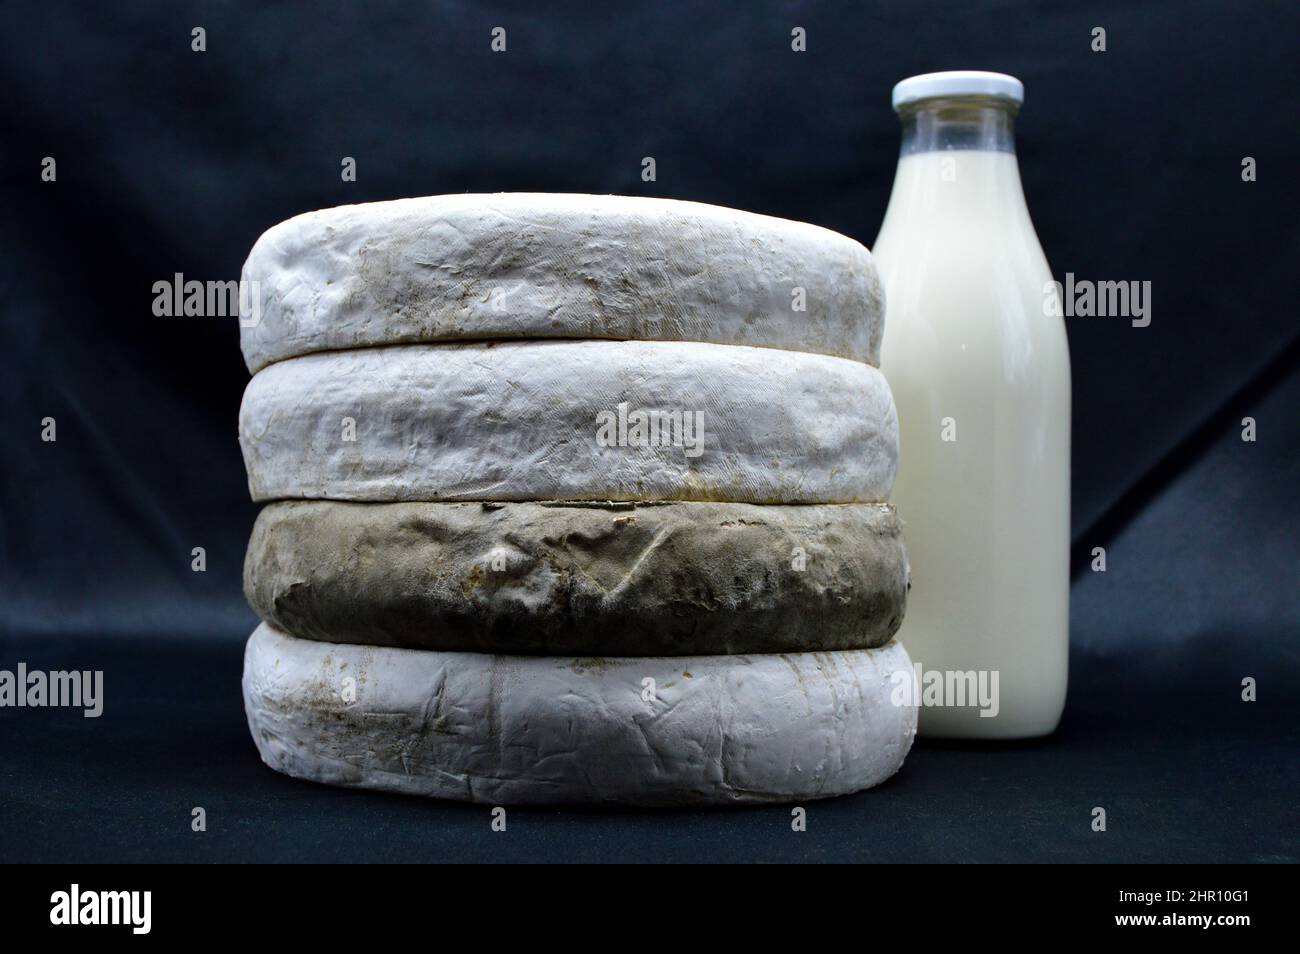 Saint Nectaire cheese. It is an Auvergne cheese and a mountain cheese made with cow’s milk. Stock Photo